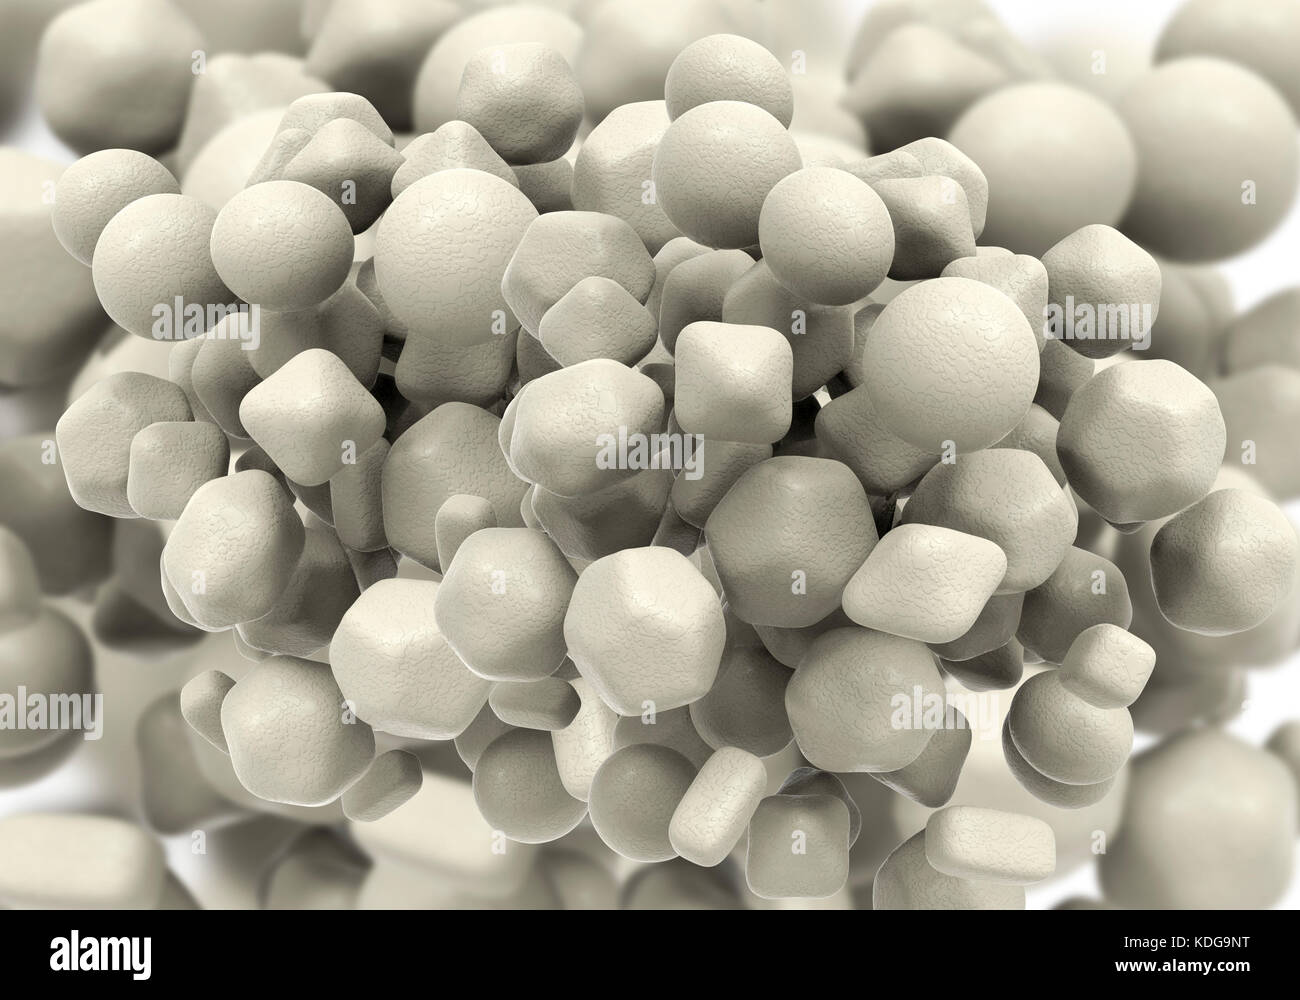 Zinc oxide (ZnO) nanoparticles, computer illustration. ZnO nanoparticles have application as biosensors, in drug delivery, cosmetics, optical and electrical devices, solar cells and other areas. Stock Photo